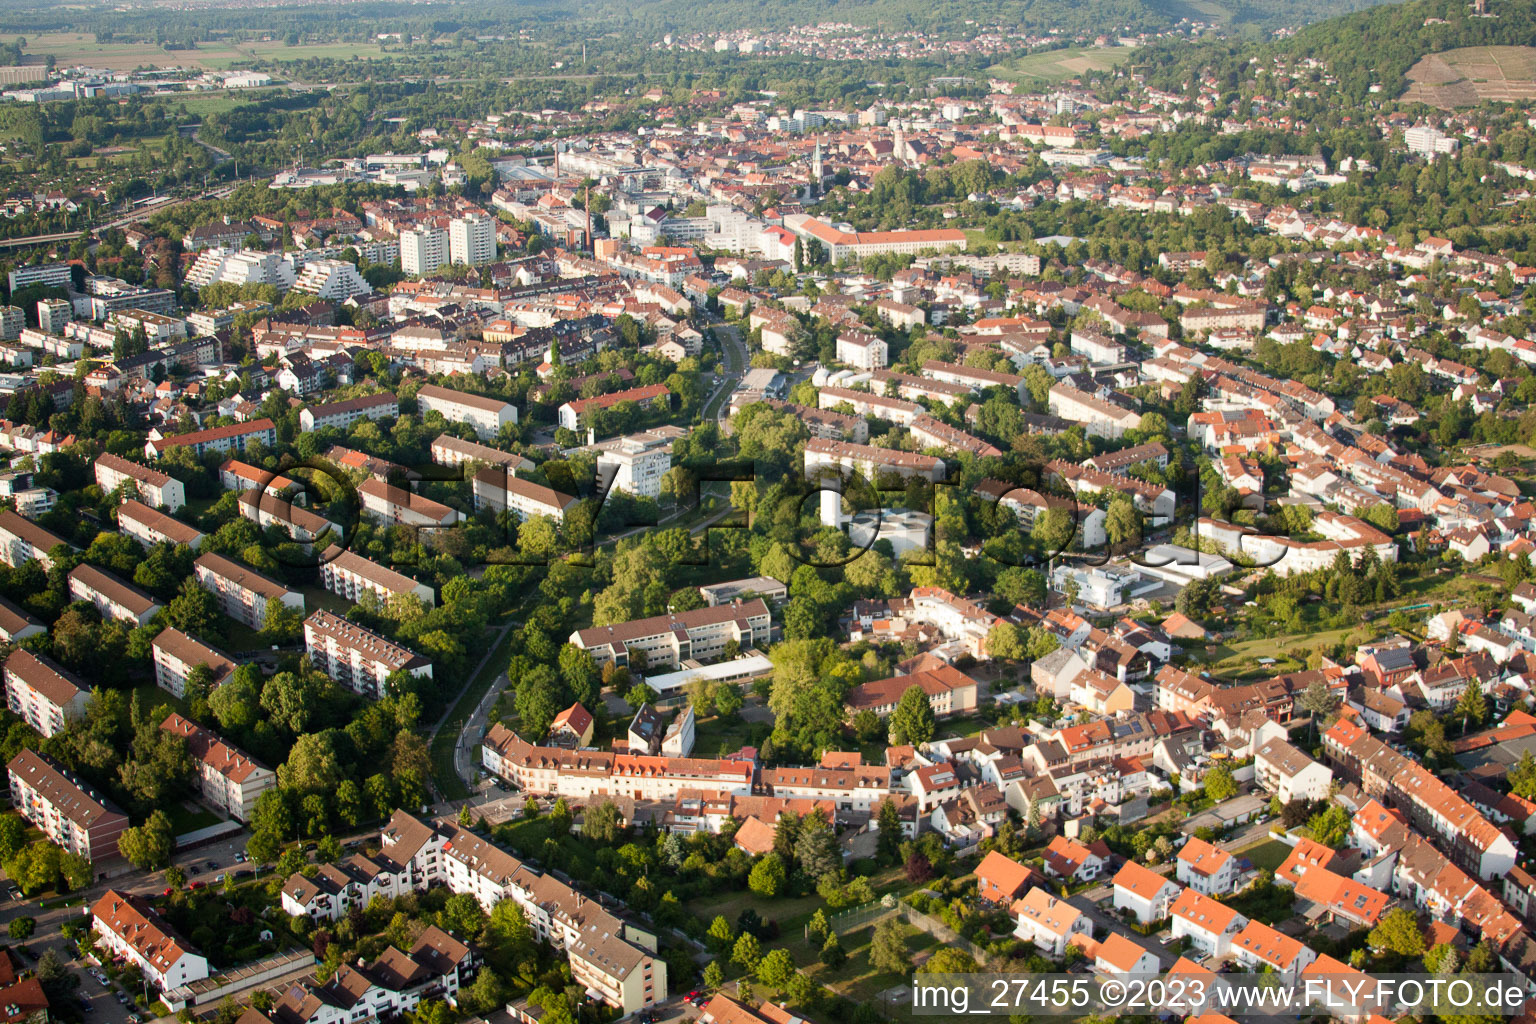 Ouch in the district Durlach in Karlsruhe in the state Baden-Wuerttemberg, Germany seen from a drone